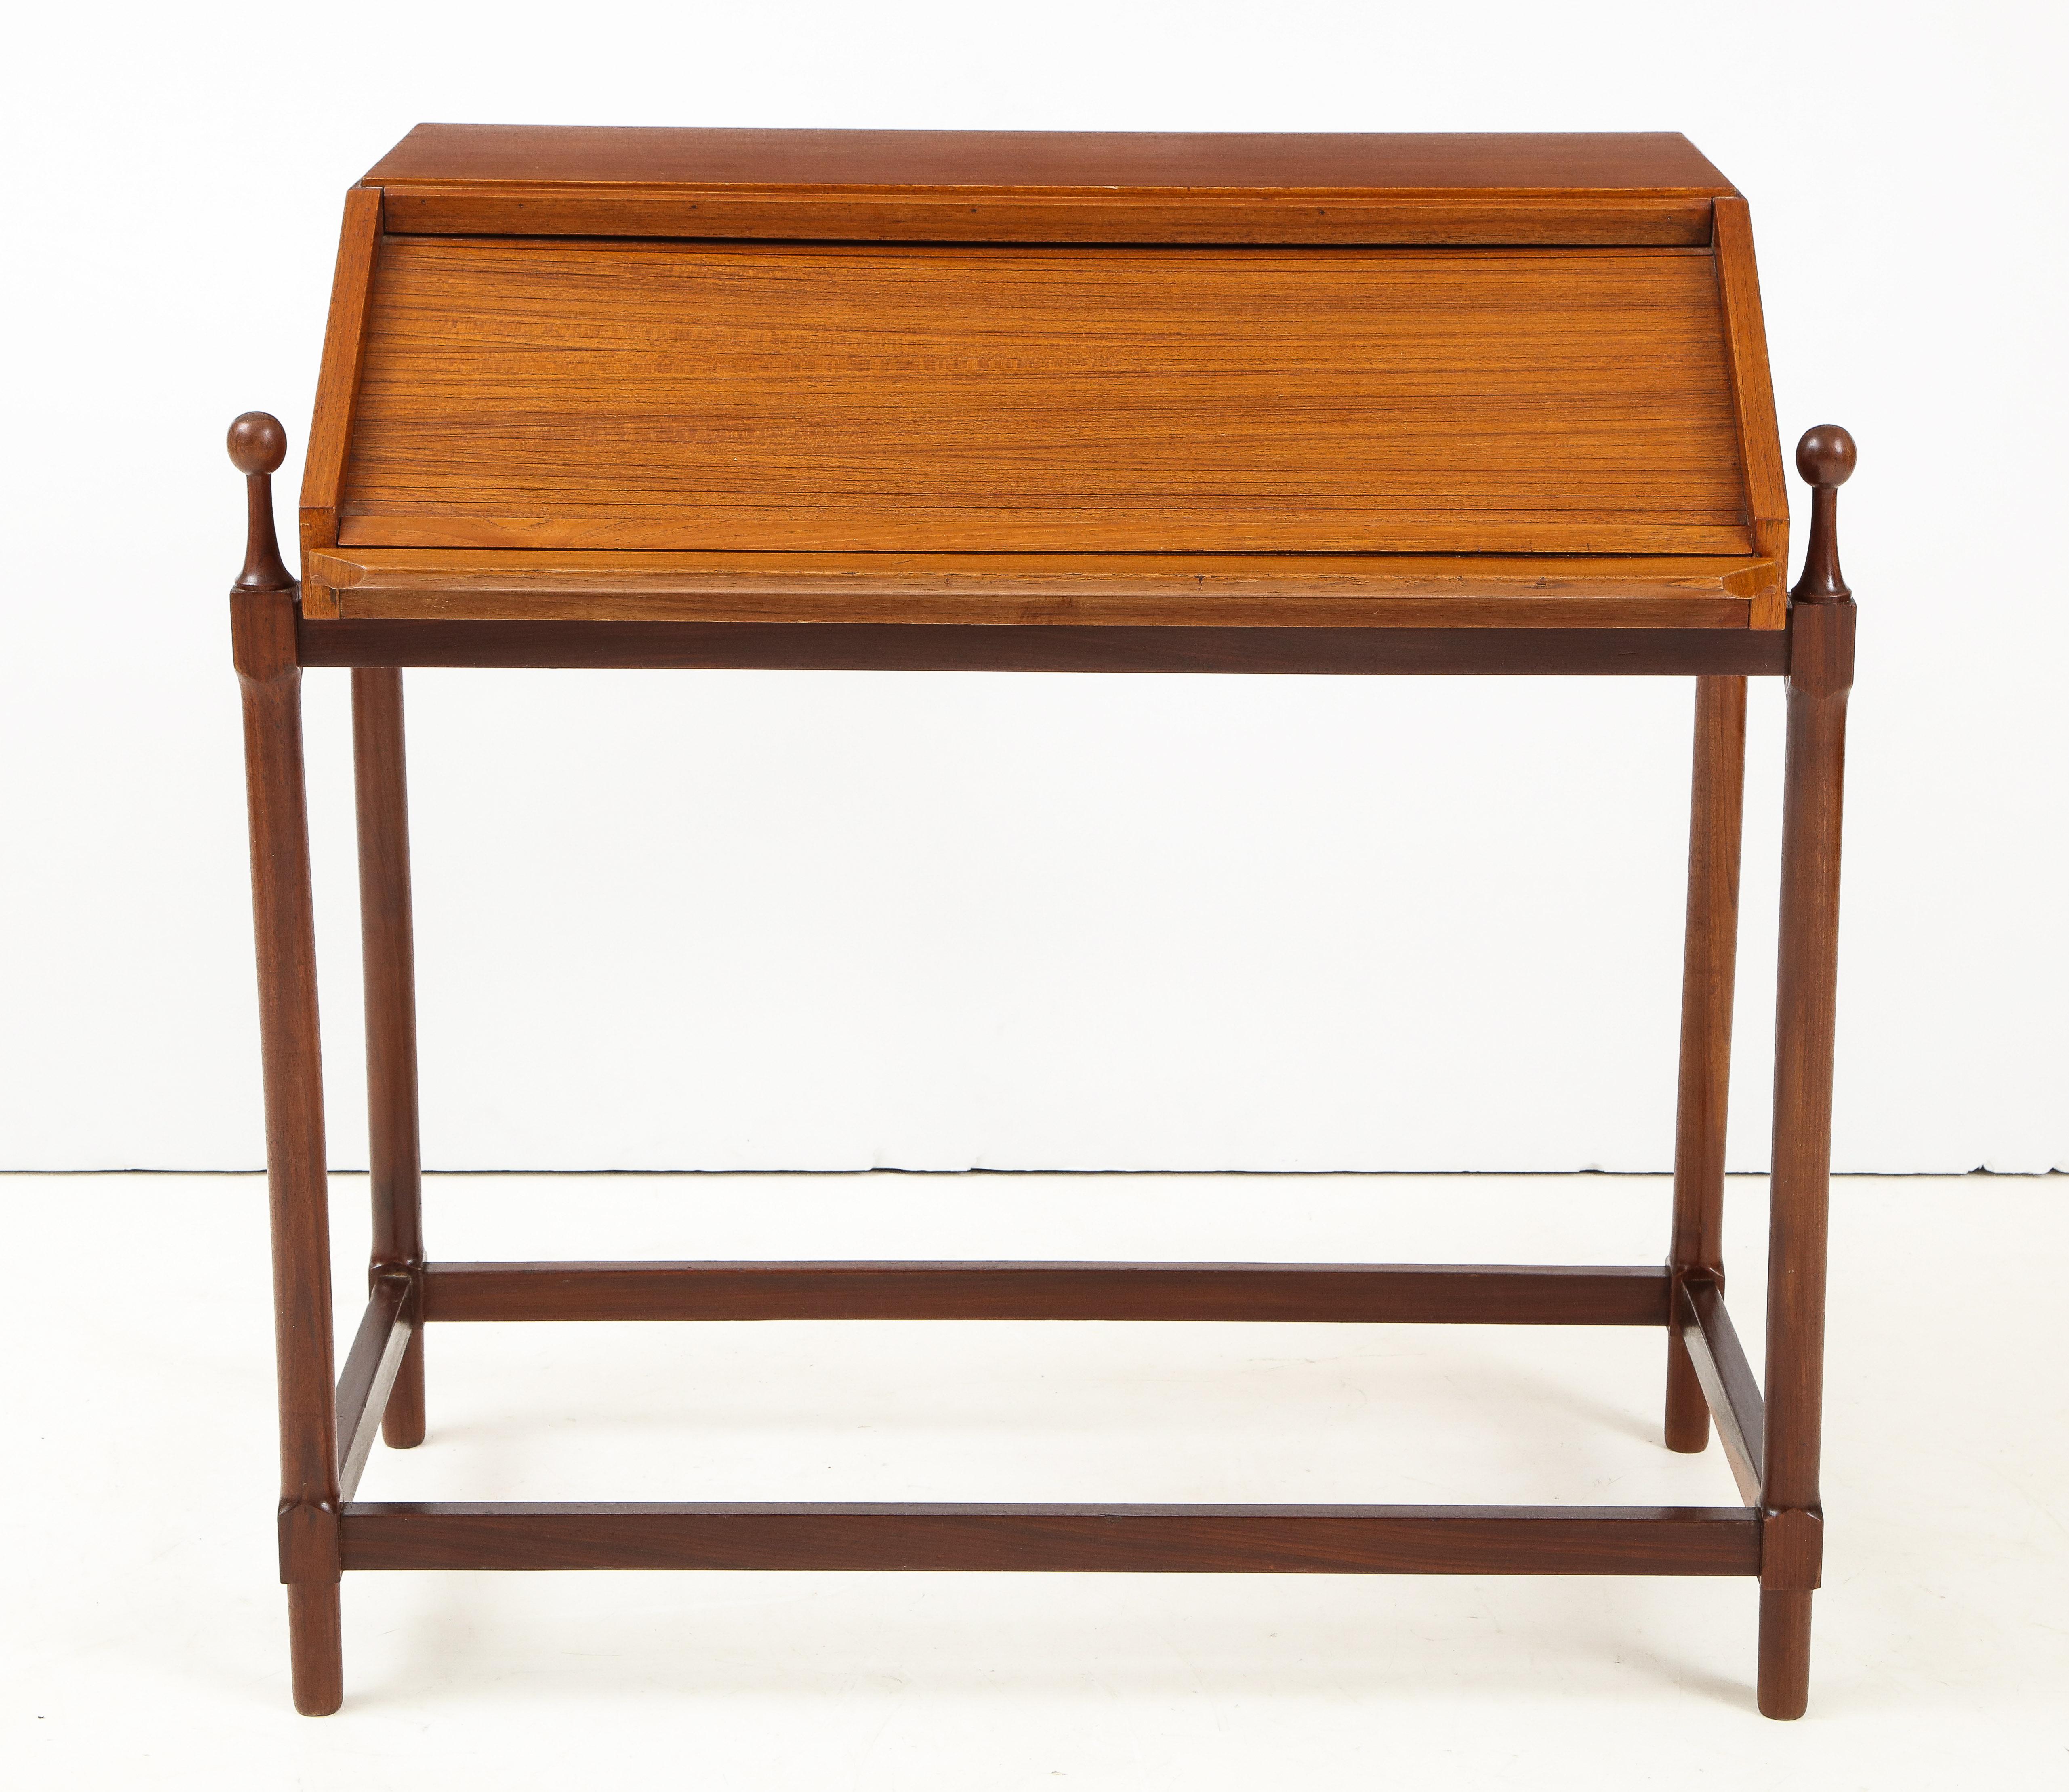 Modernist Italian 1960s teak compact rollup secretary desk by Fratelli Proserpio. Writing surface pulls out for ease of use, two trays inside the top. Very good vintage condition, unique mechanism that opens as you pullout the writing surface.